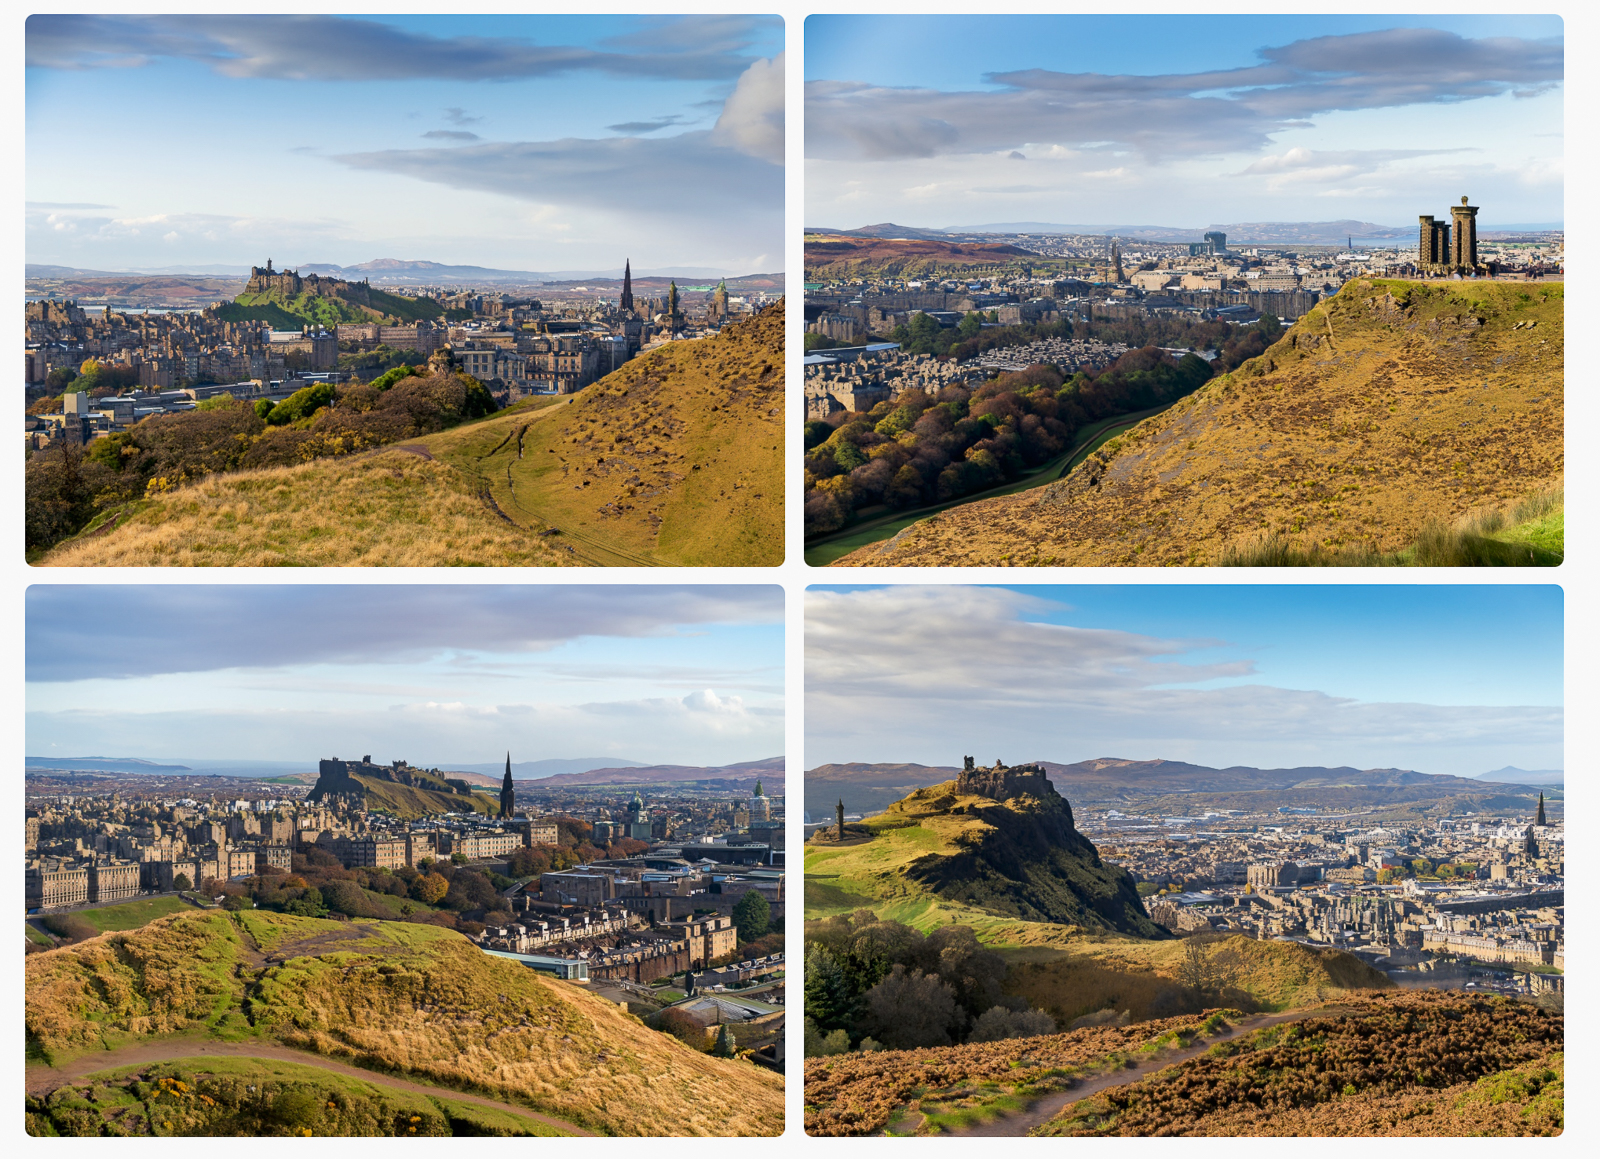 View from Arthurs Seat - generated